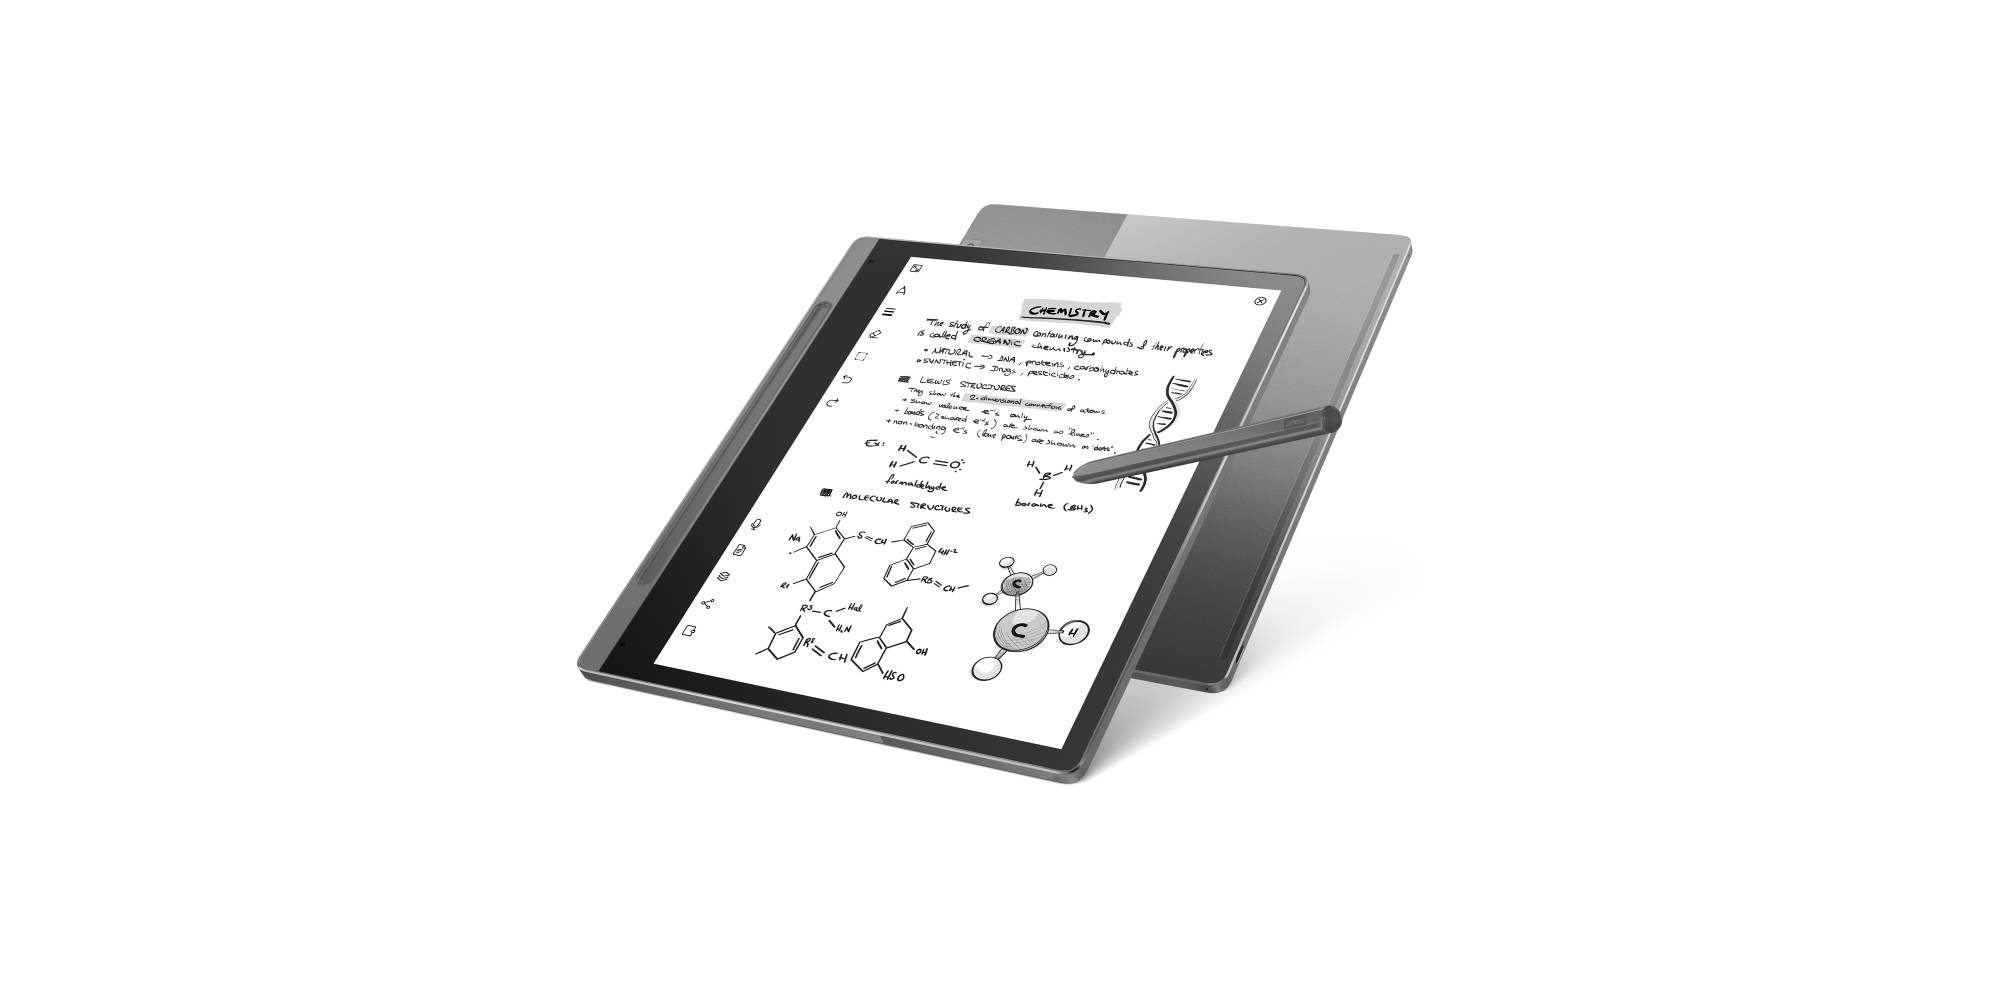 Lenovo Smart Paper review: A solid e-ink tablet spoiled by the cost